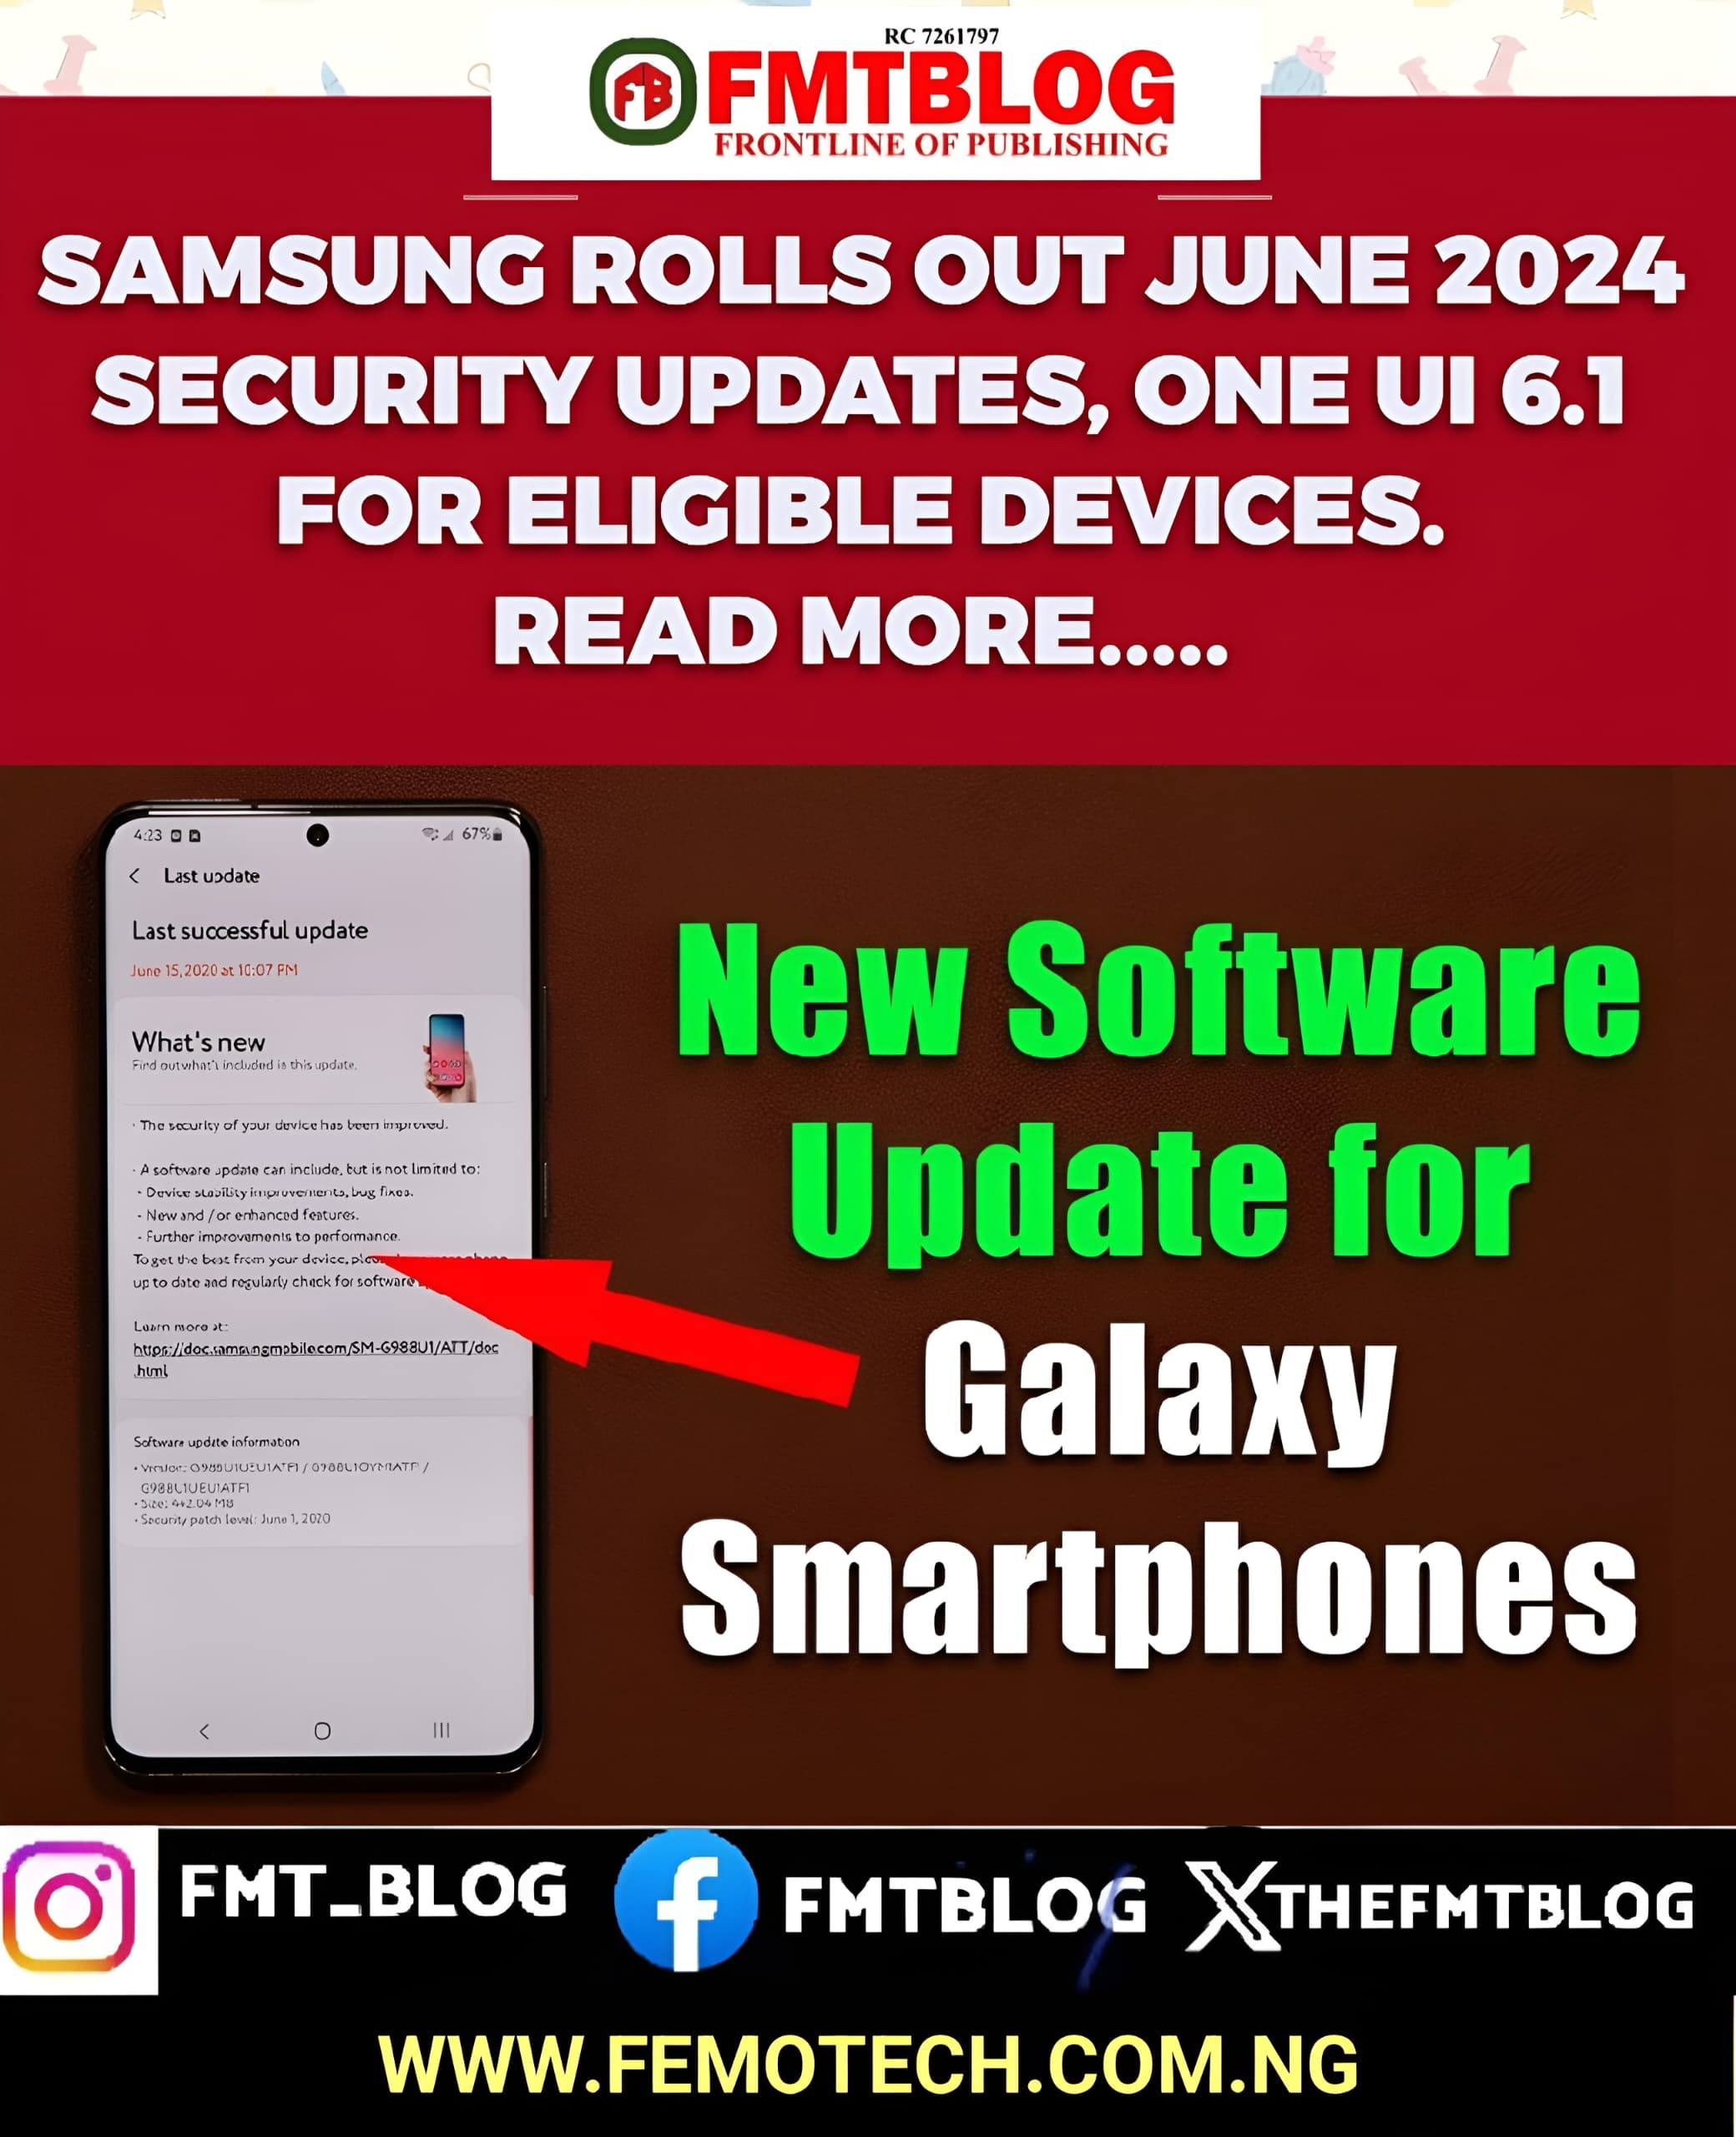 Samsung Rolls Out June 2024 Security Updates, ONE UI 6.1 For More Eligible Devices